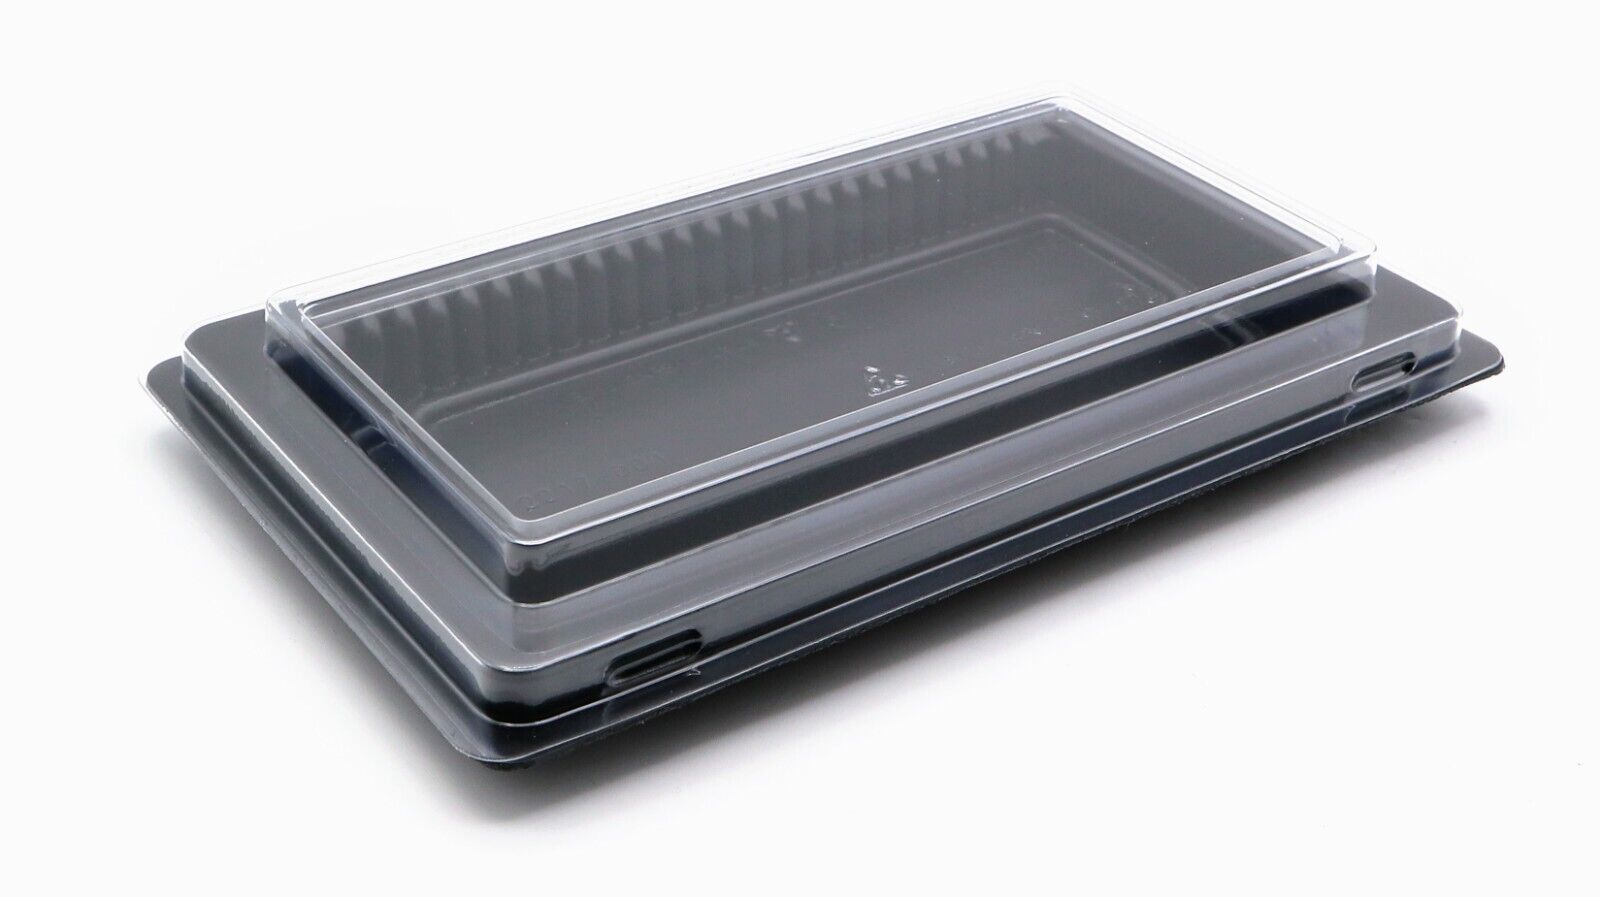 M.2 2280 Tray for Fit 25x SSDs Storage Shipping Cases - 2 CT or 5 CT